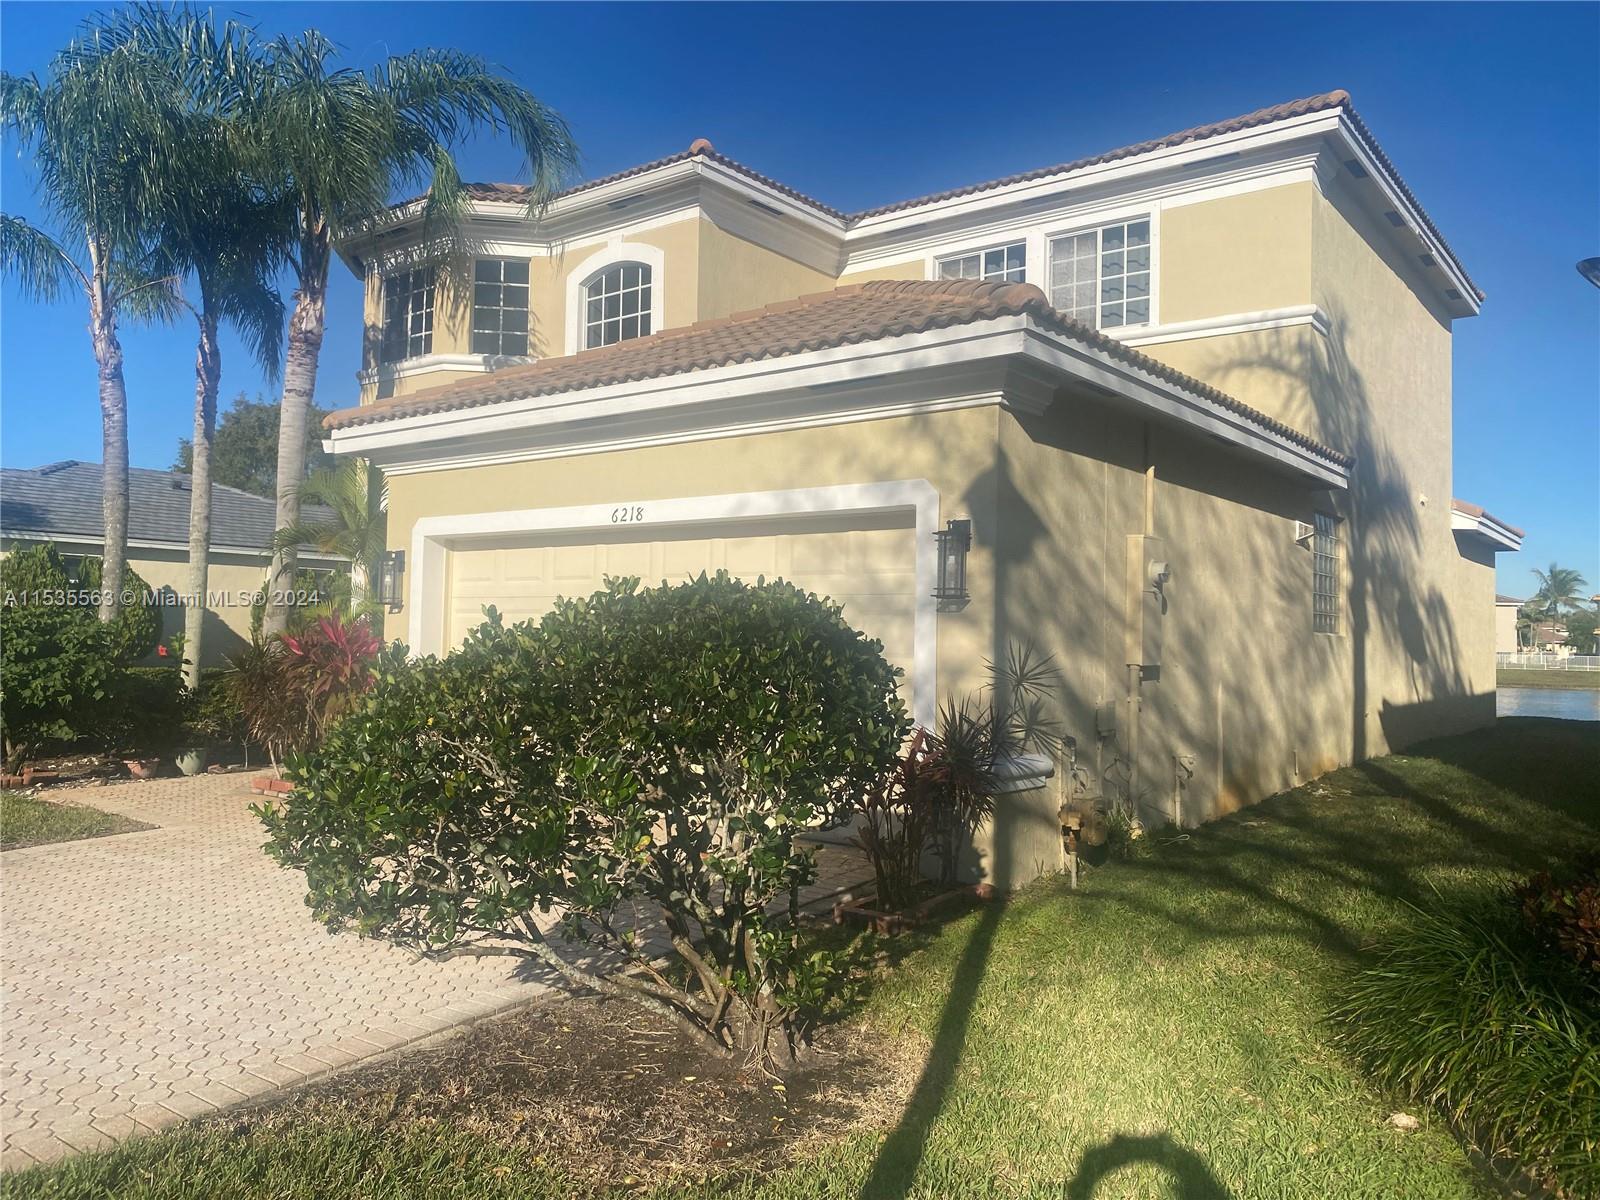 6218 SW 194th Ave, Pembroke Pines, Florida 33332, 4 Bedrooms Bedrooms, ,2 BathroomsBathrooms,Residential,For Sale,6218 SW 194th Ave,A11535563